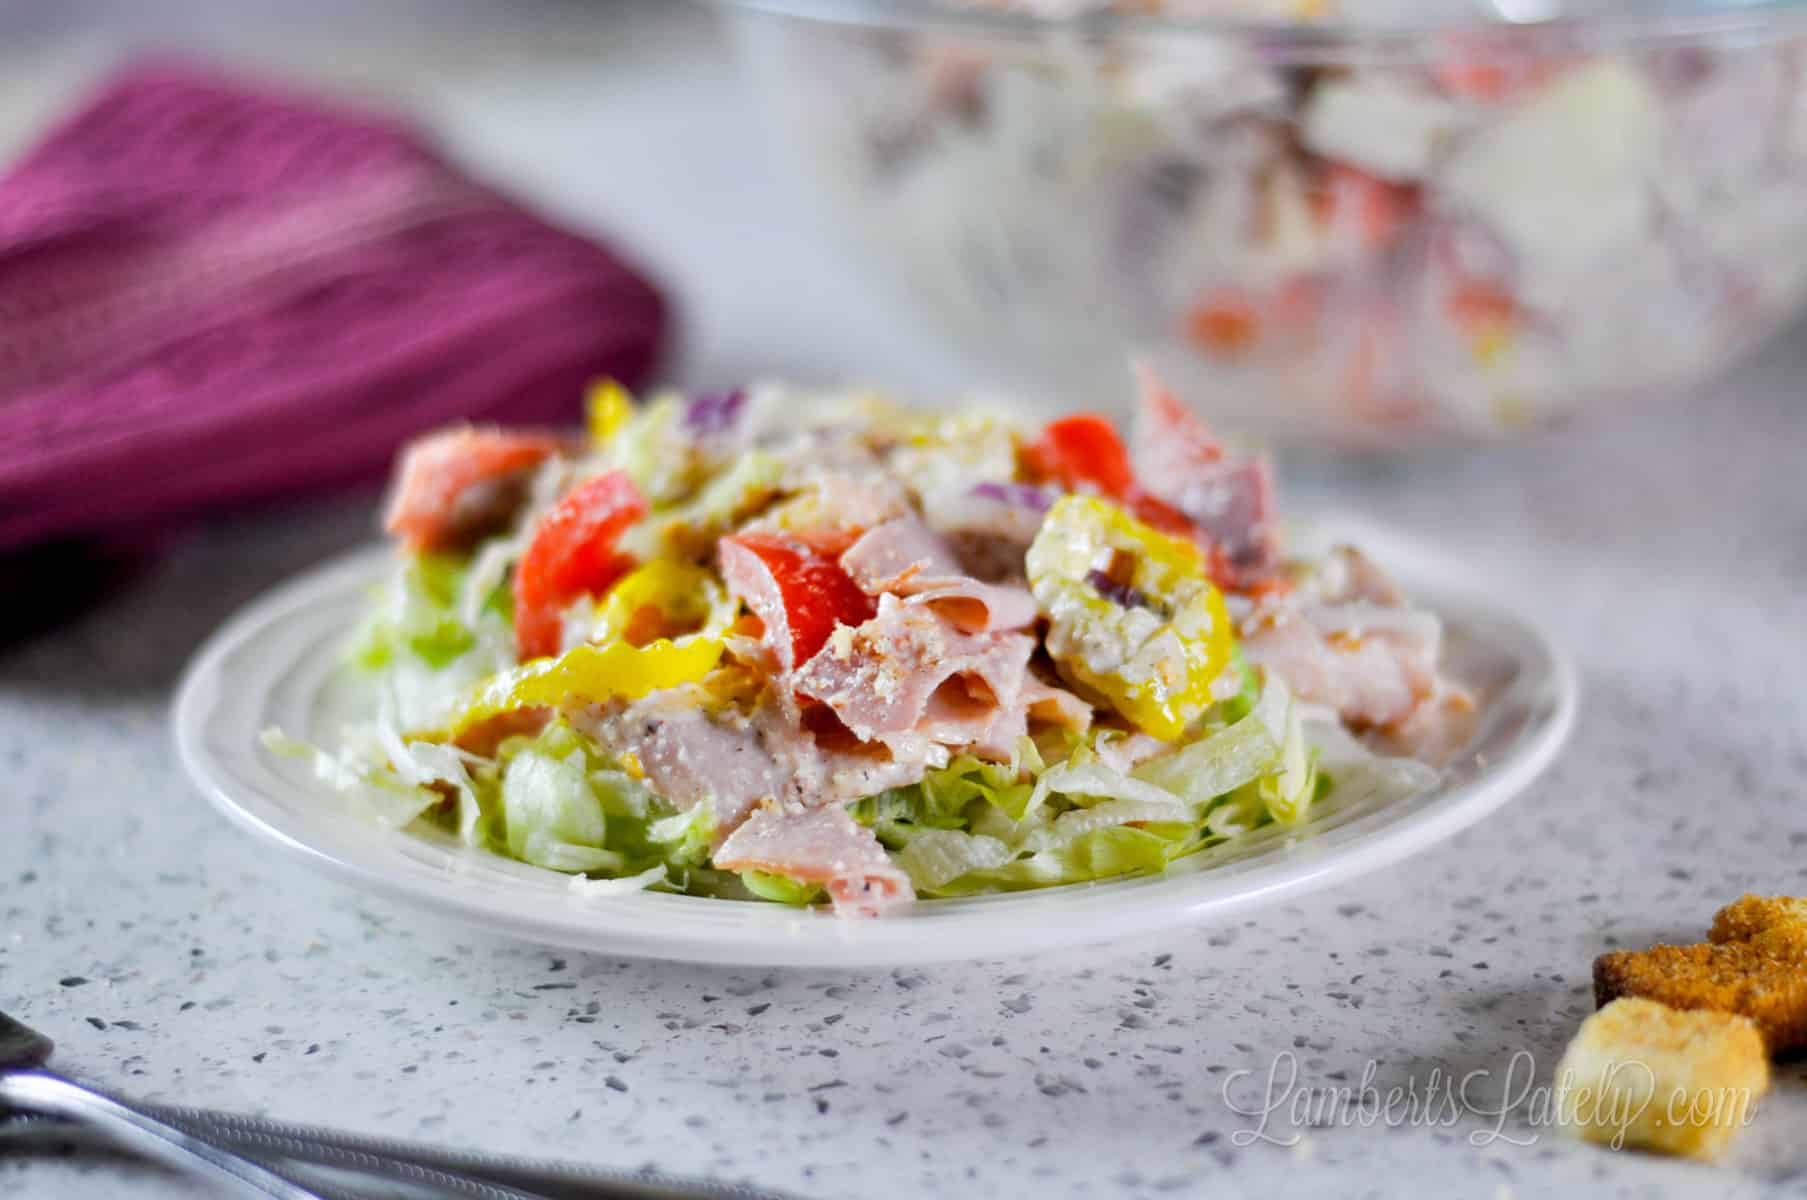 italian grinder salad mix over a bed of lettuce on a plate.